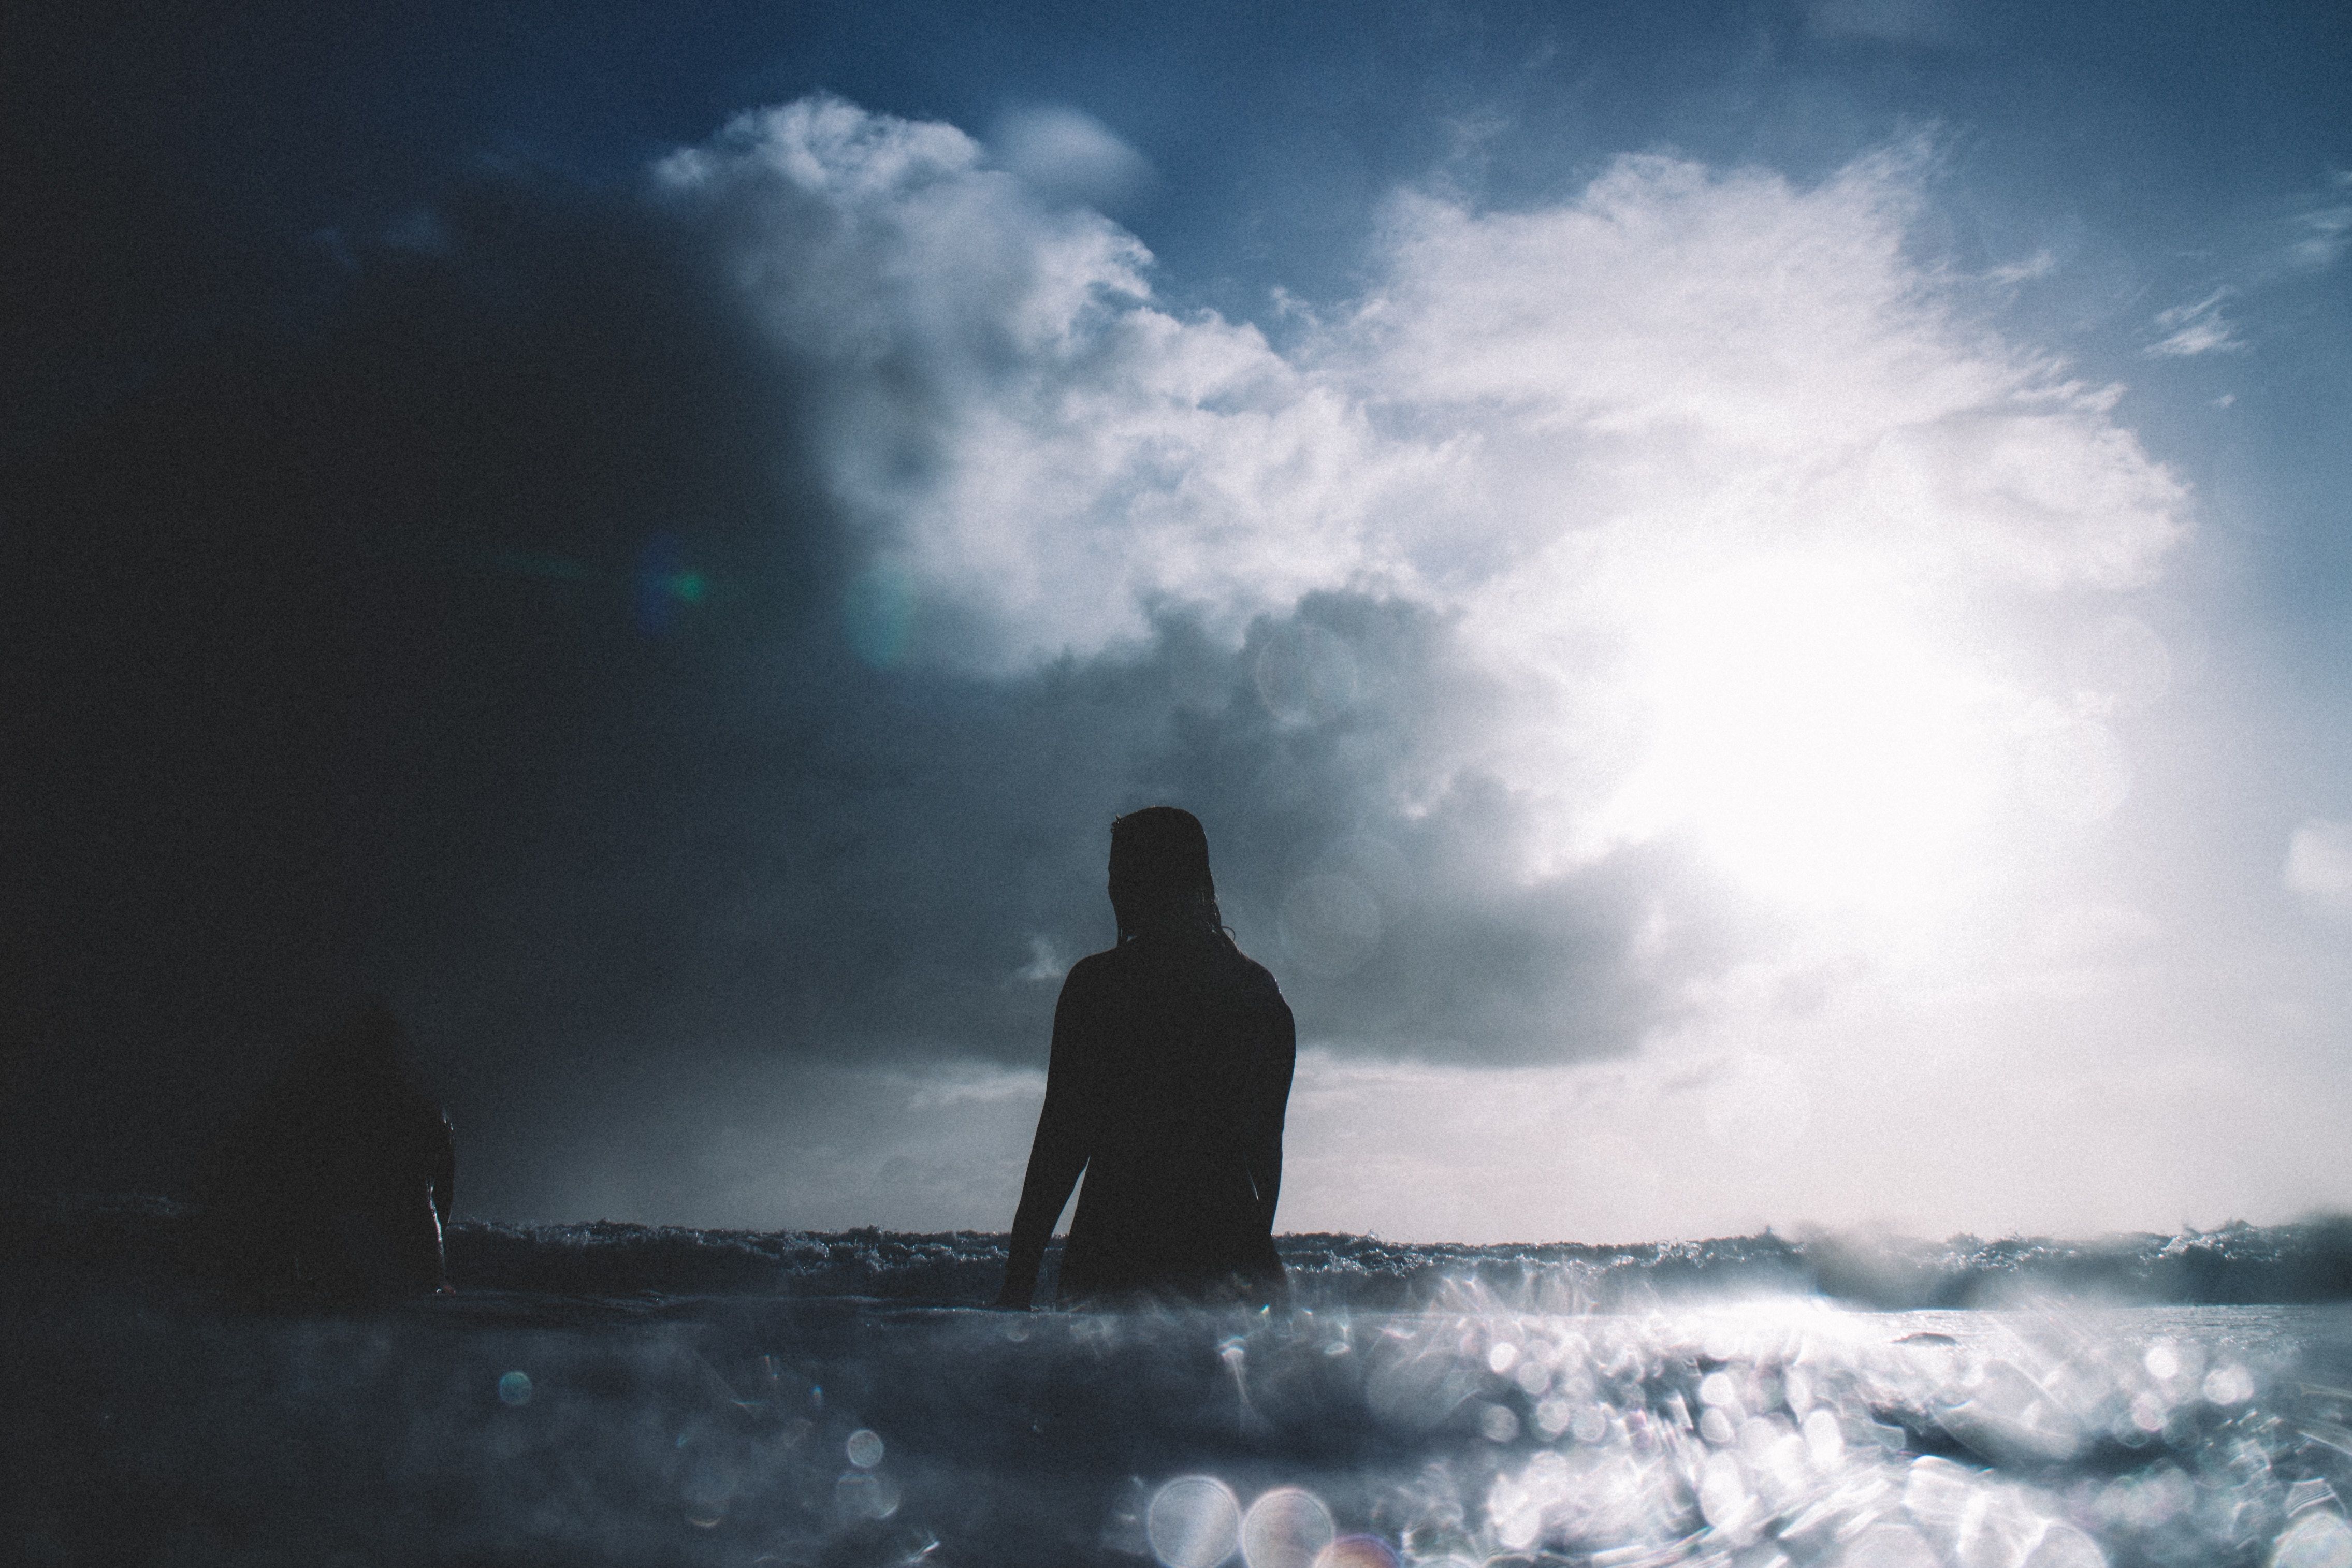 4542x3028 #cloud, #sky, #cloudy, #sea, #ocean, #woman, #girl, # wallpaper, #beach wallpaper, #silhouette, #Creative Commons image, #person, #surfing, #water, #beach background, #surf, #swim, #wave, #underwater, #surfer, #wafe. Mocah.org HD